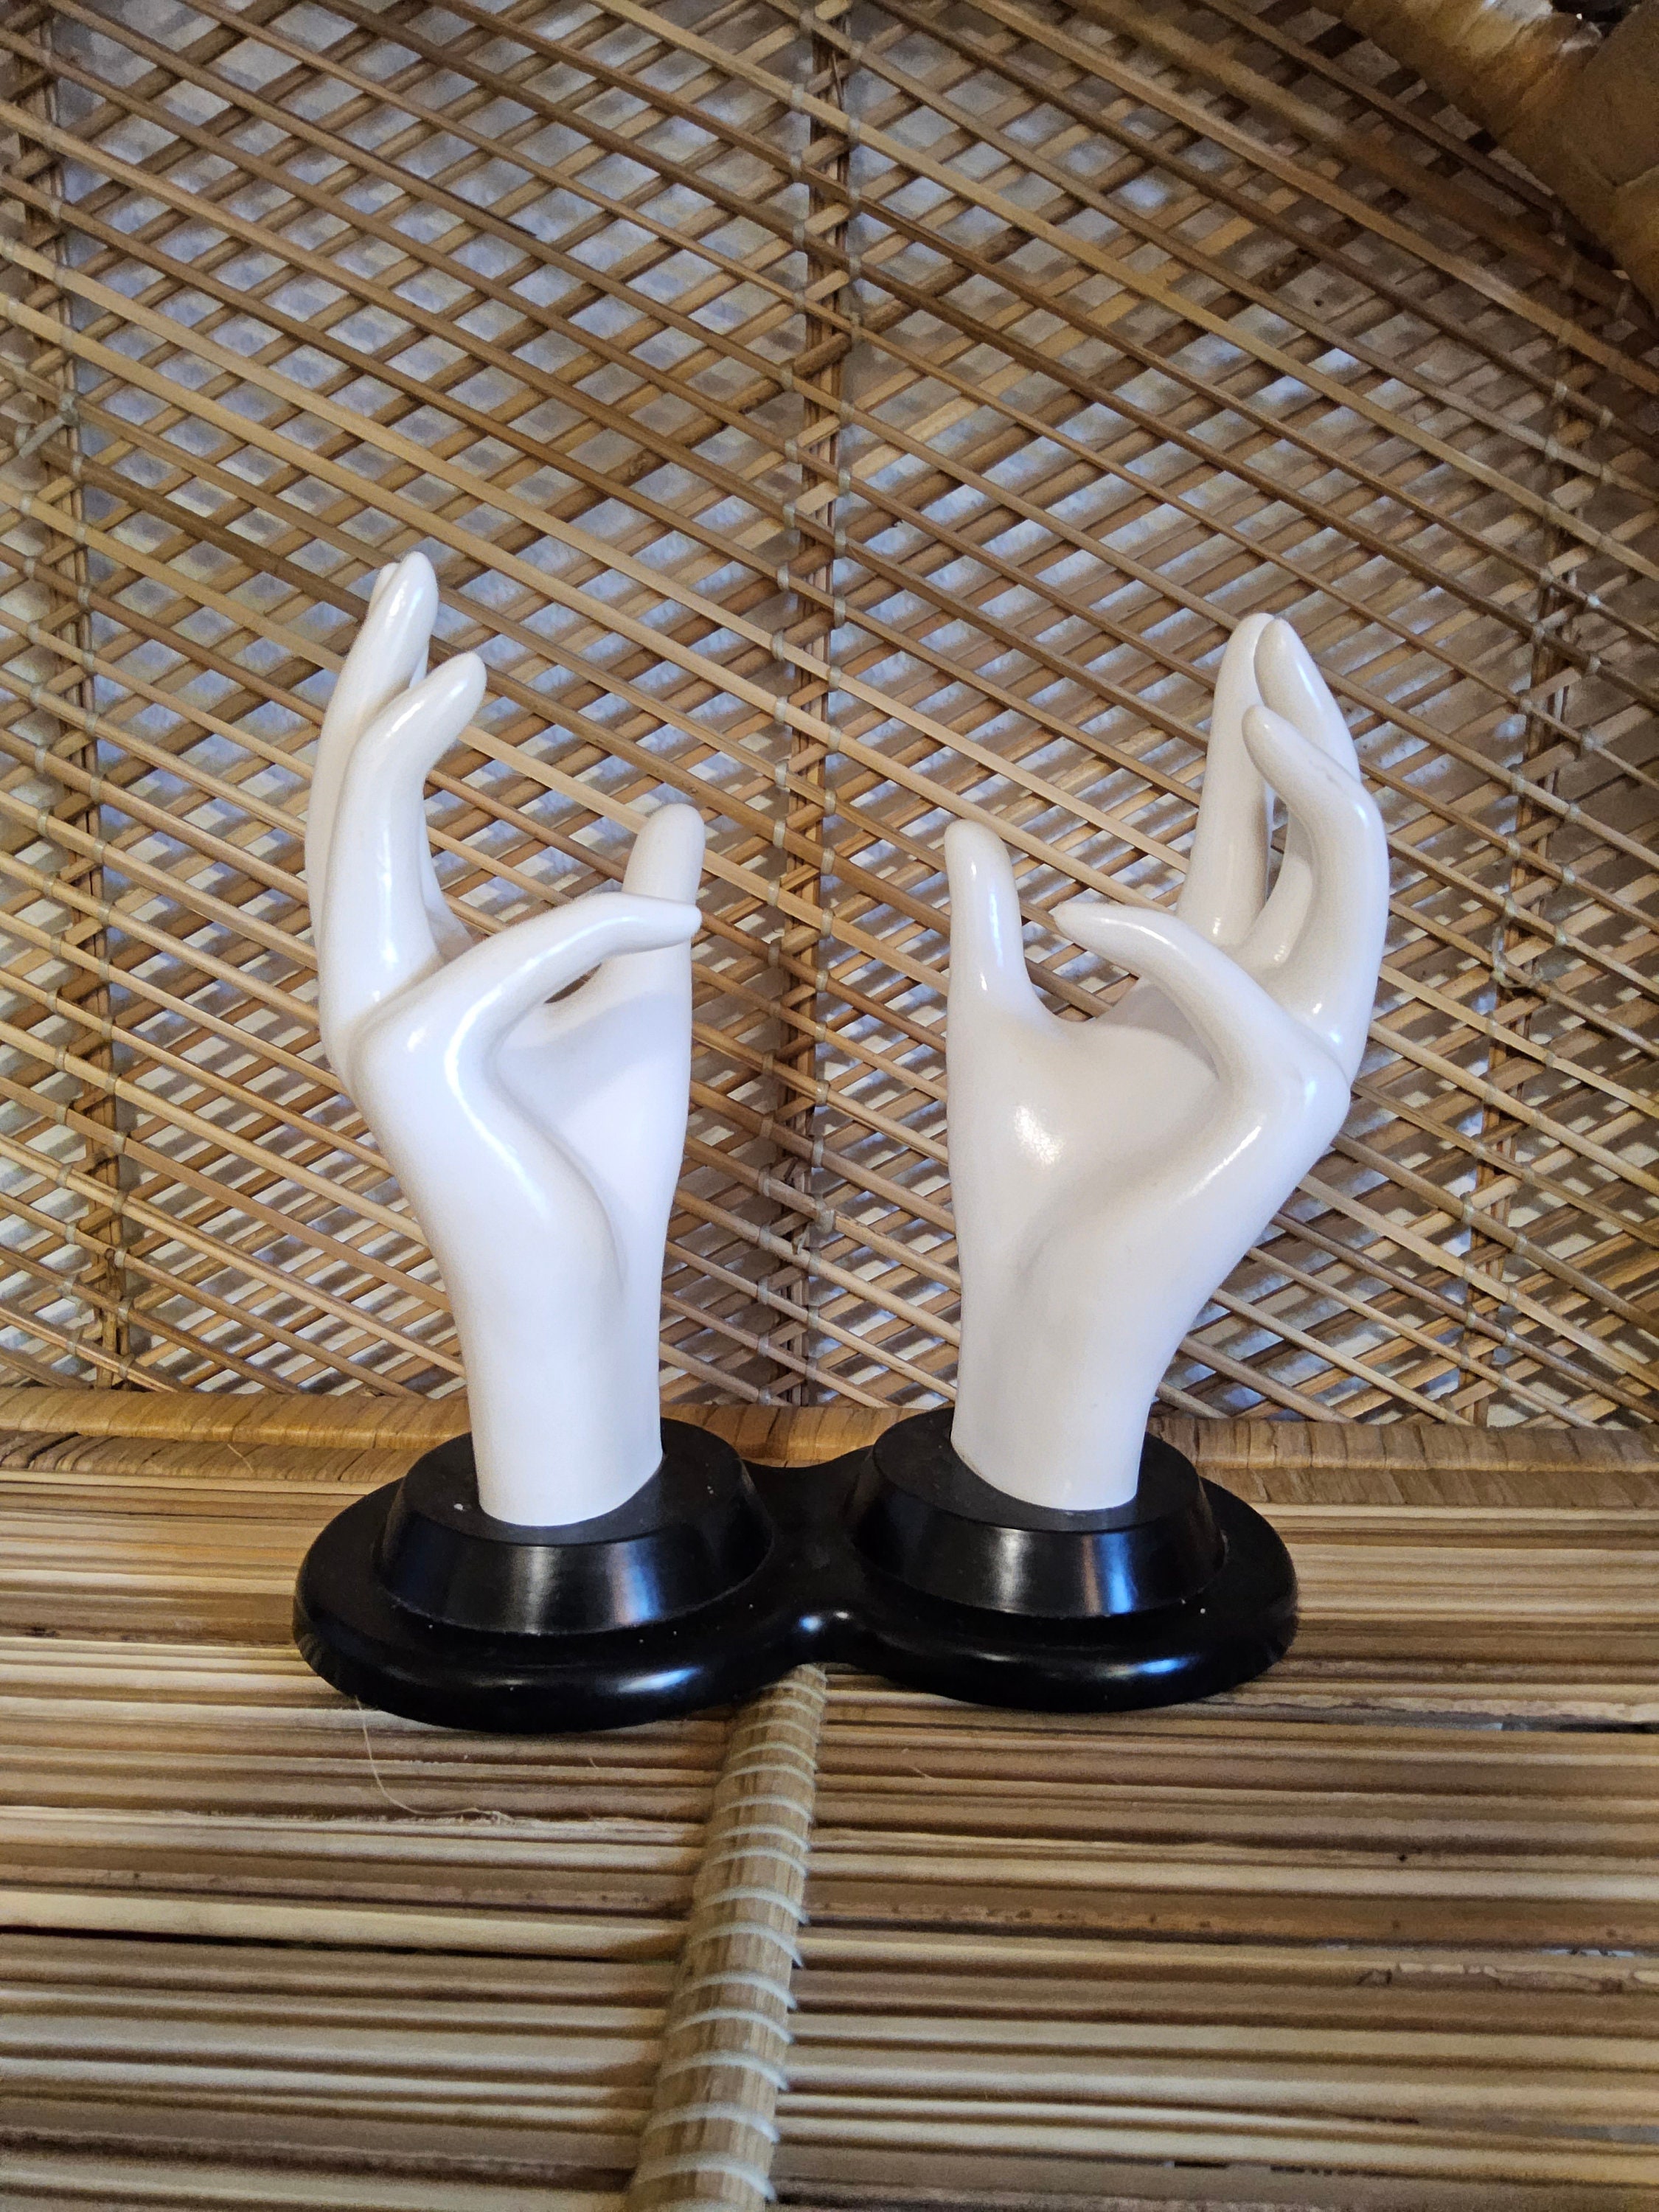 Used Mannequin Hands - Set of 4